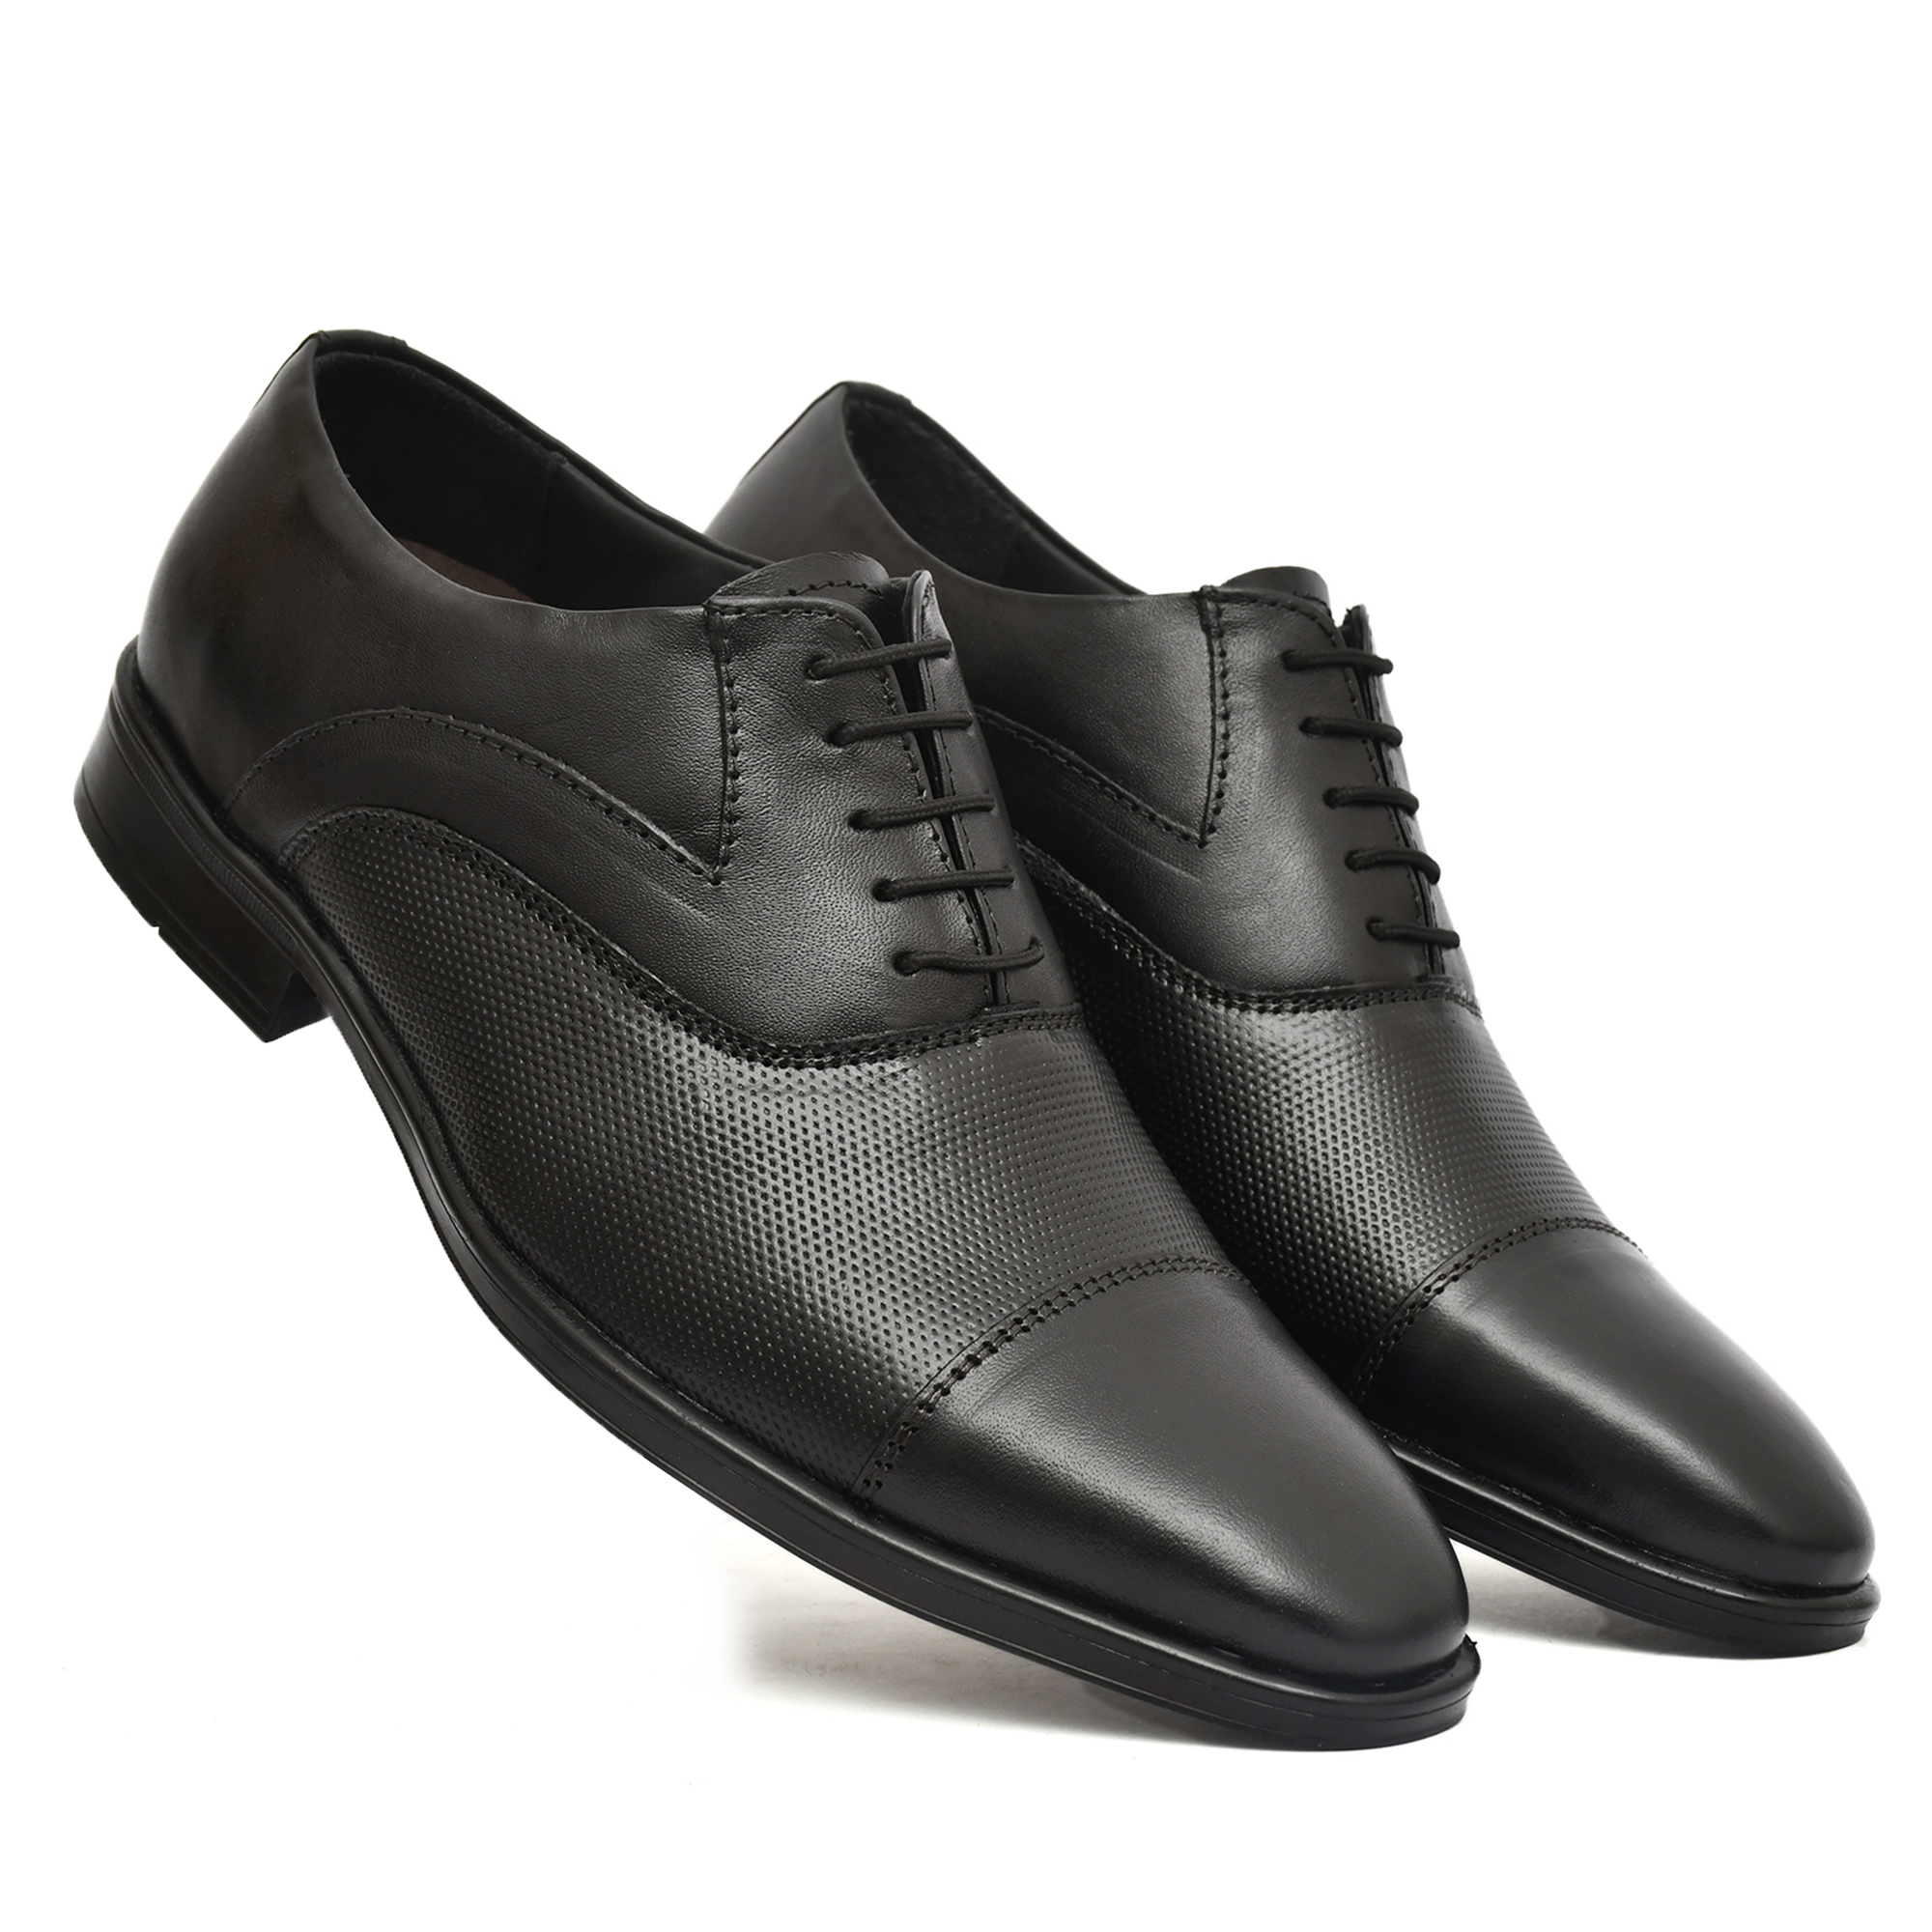 Black Leather Oxford Shoes for men with Memory foam footpad. Size: 5-11UK